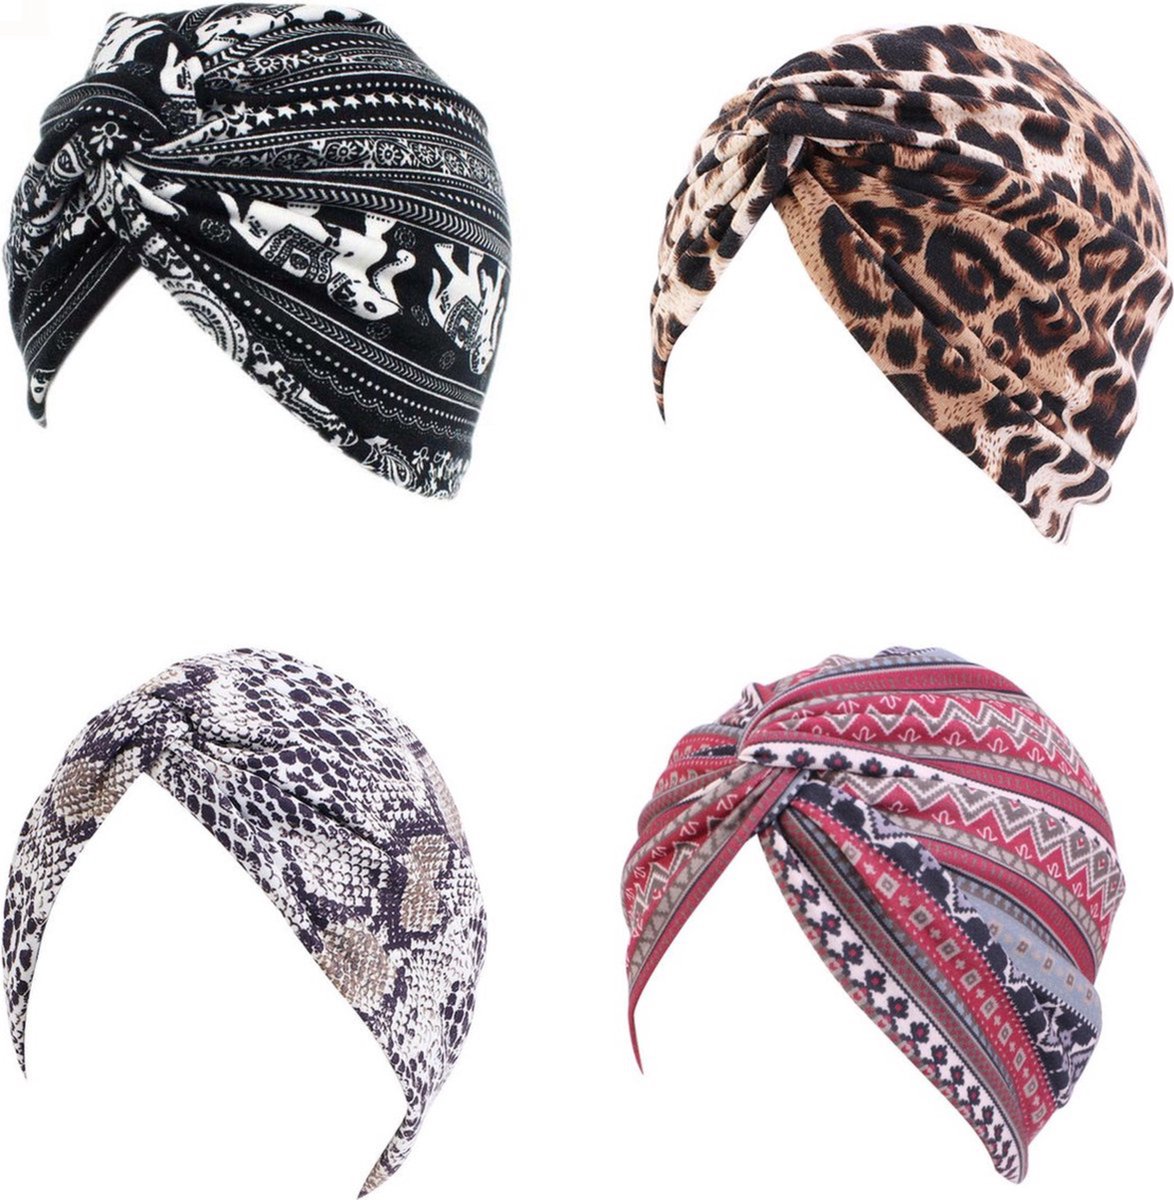 4x Chemo Muts Dames - Zomer Cap - Hoofddeksel - Alopecia - Somstyle